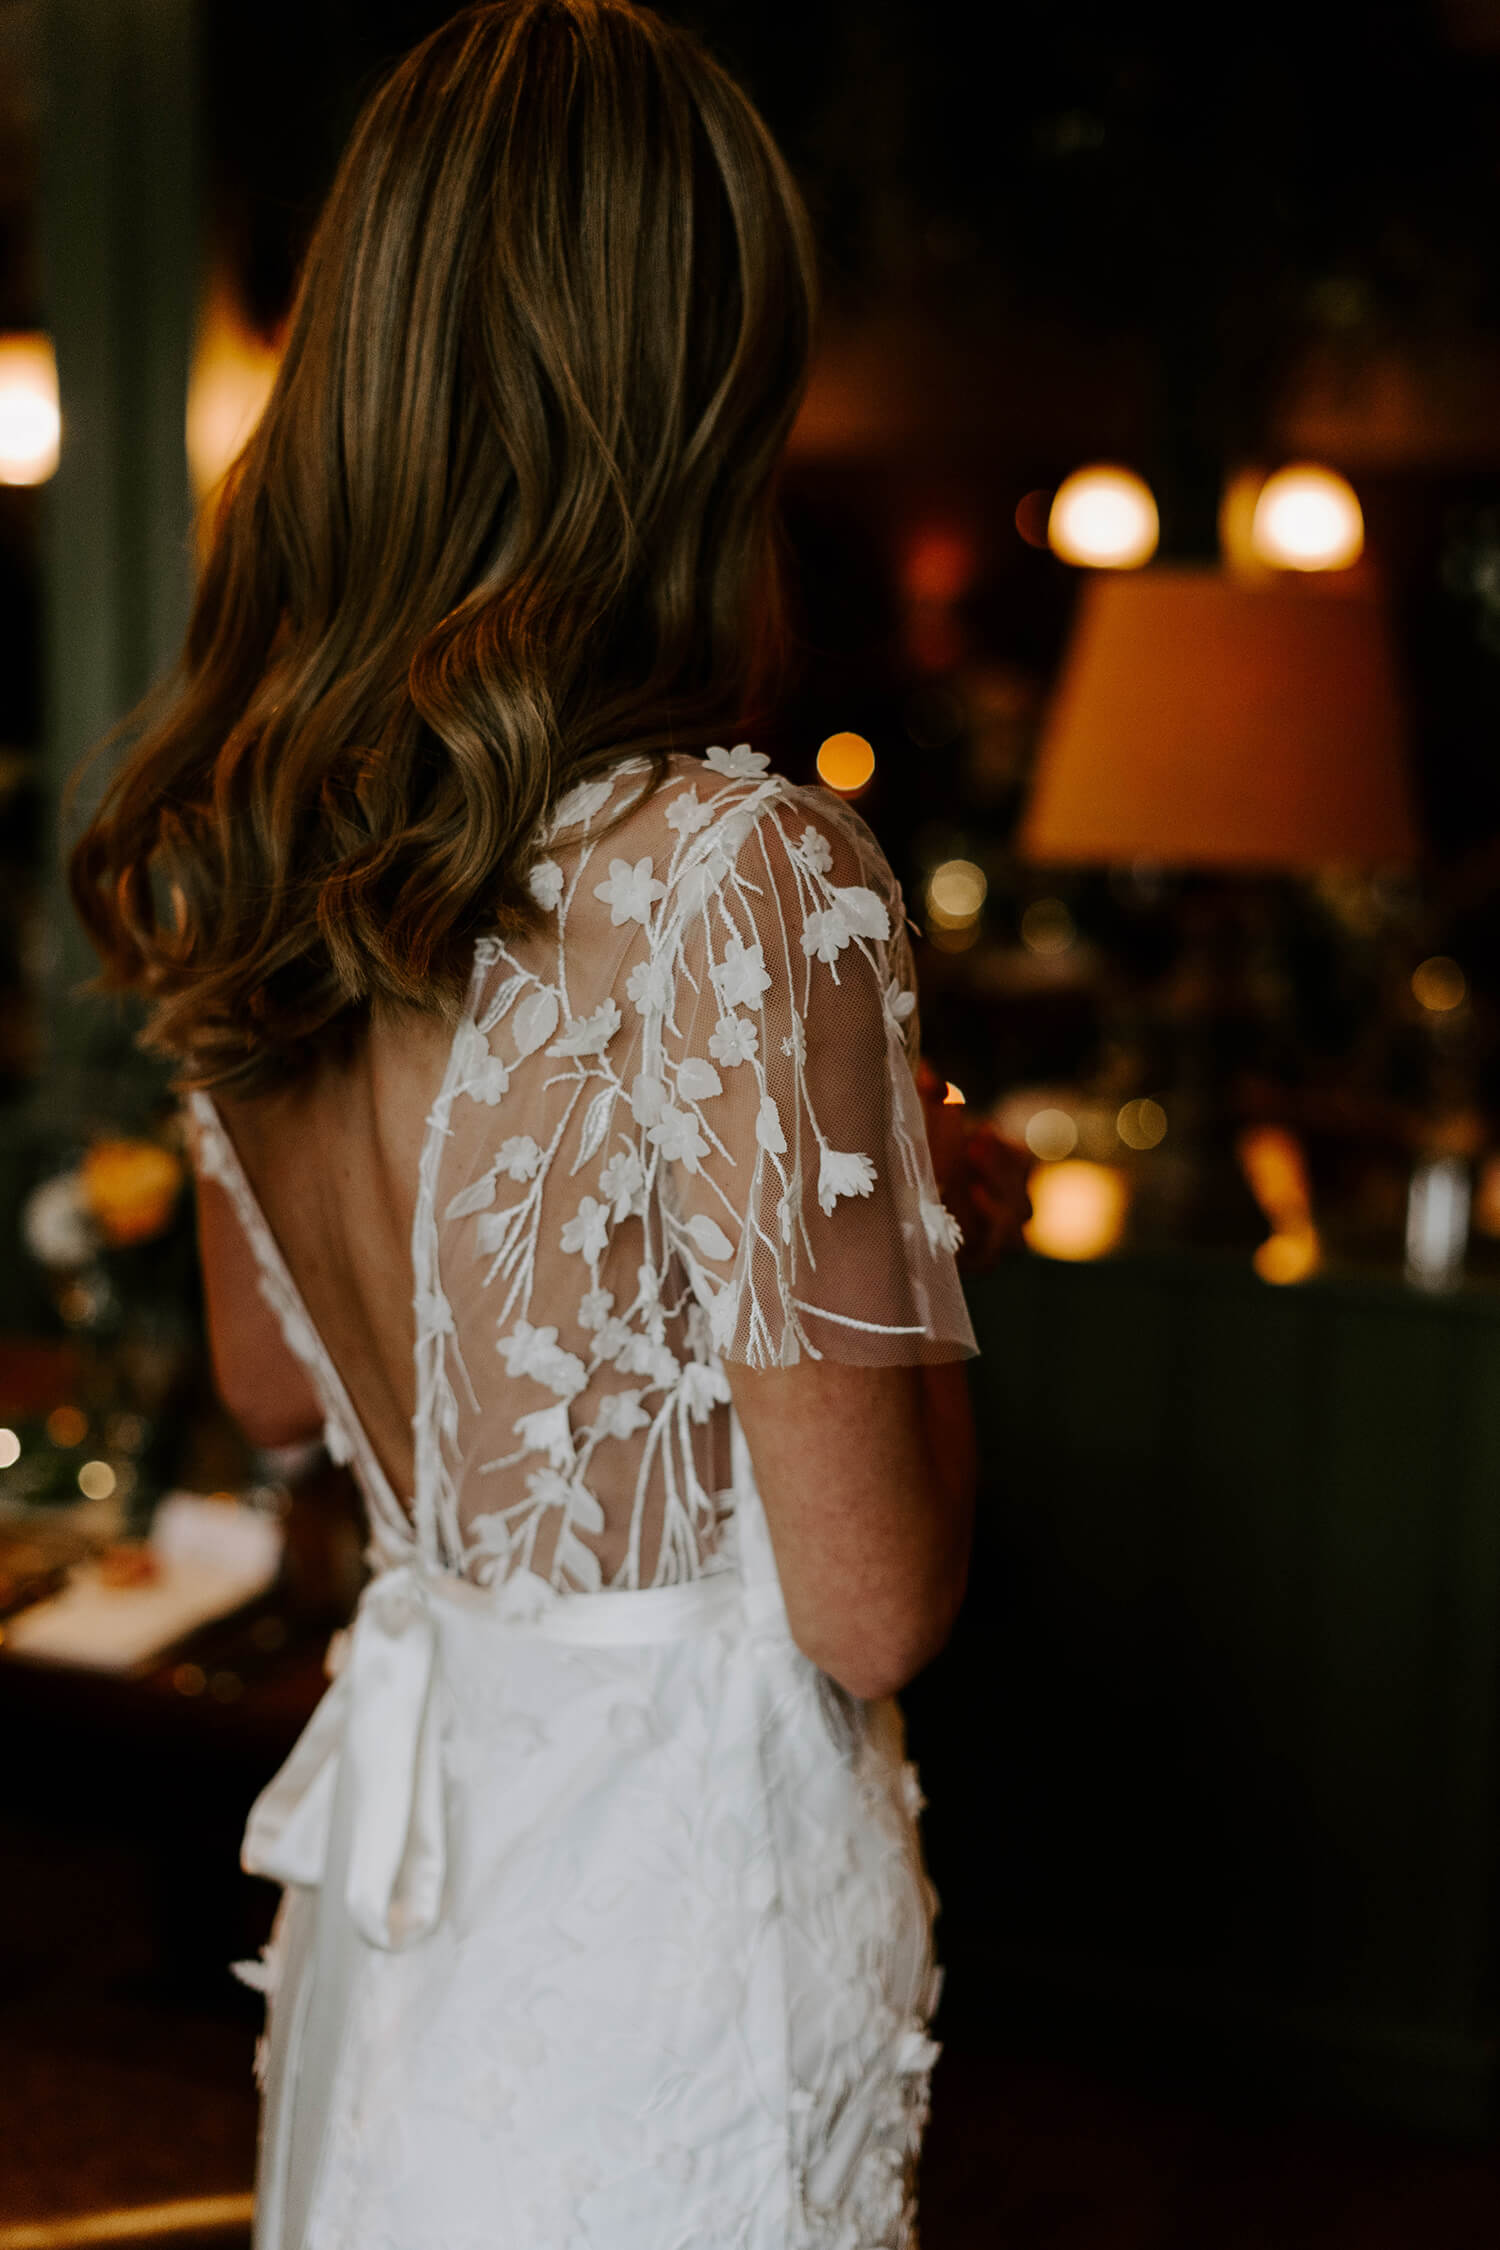 Luci's bespoke wedding dress from Constellation Ame